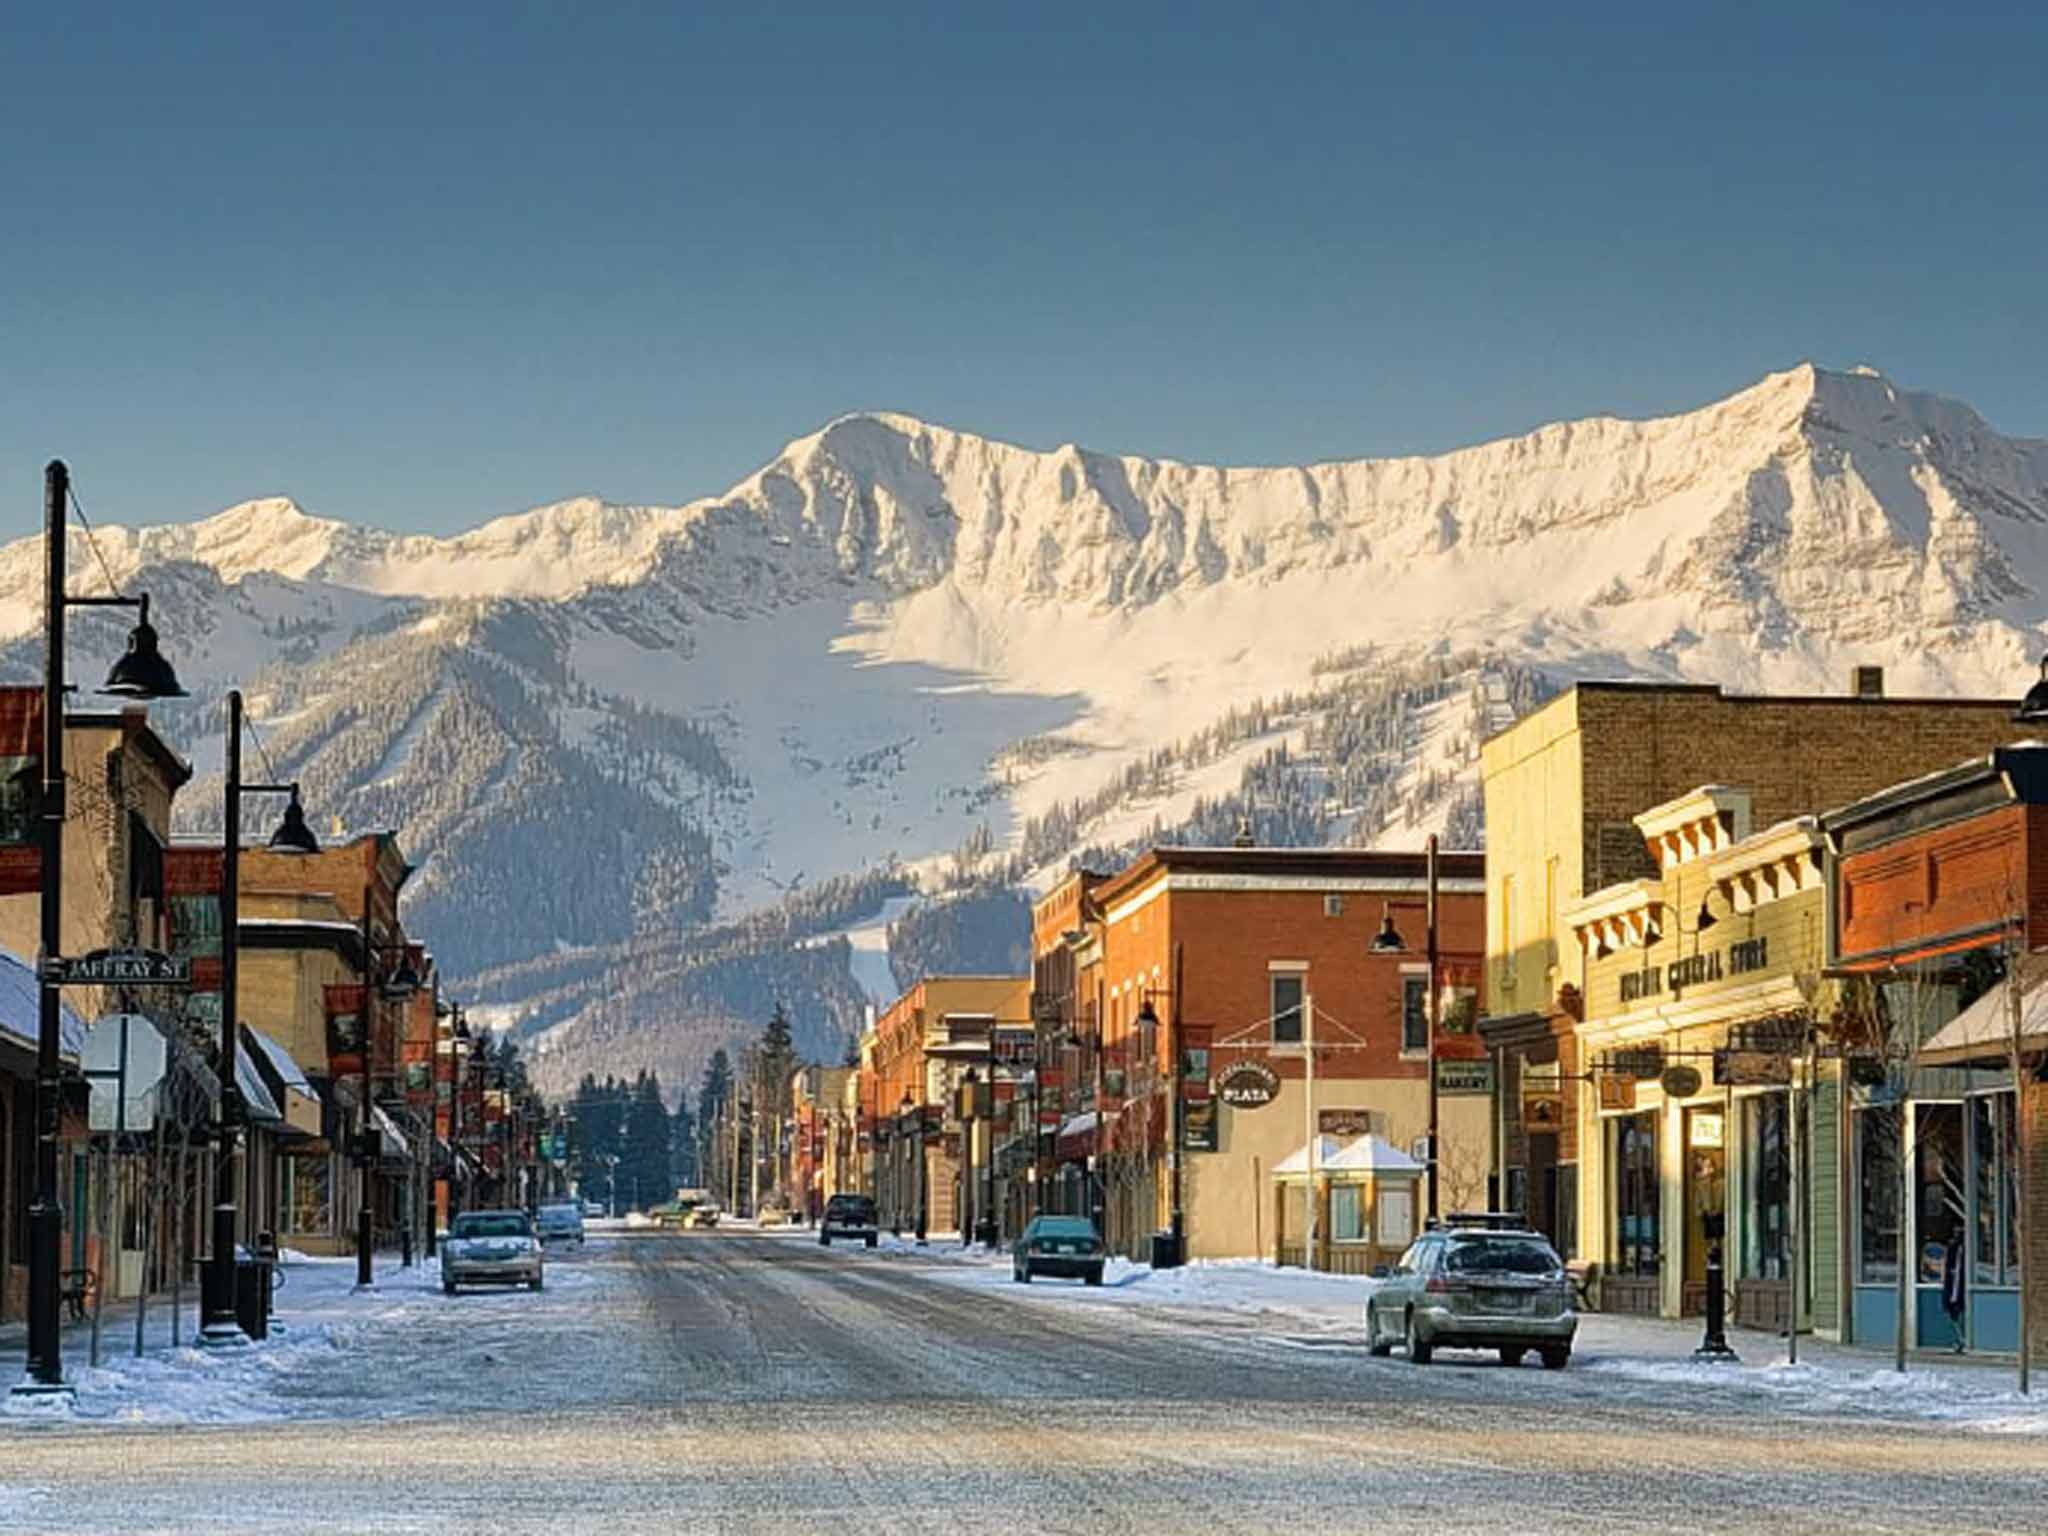 Downtown: Victoria Avenue in Fernie with the Lizard Range in the background